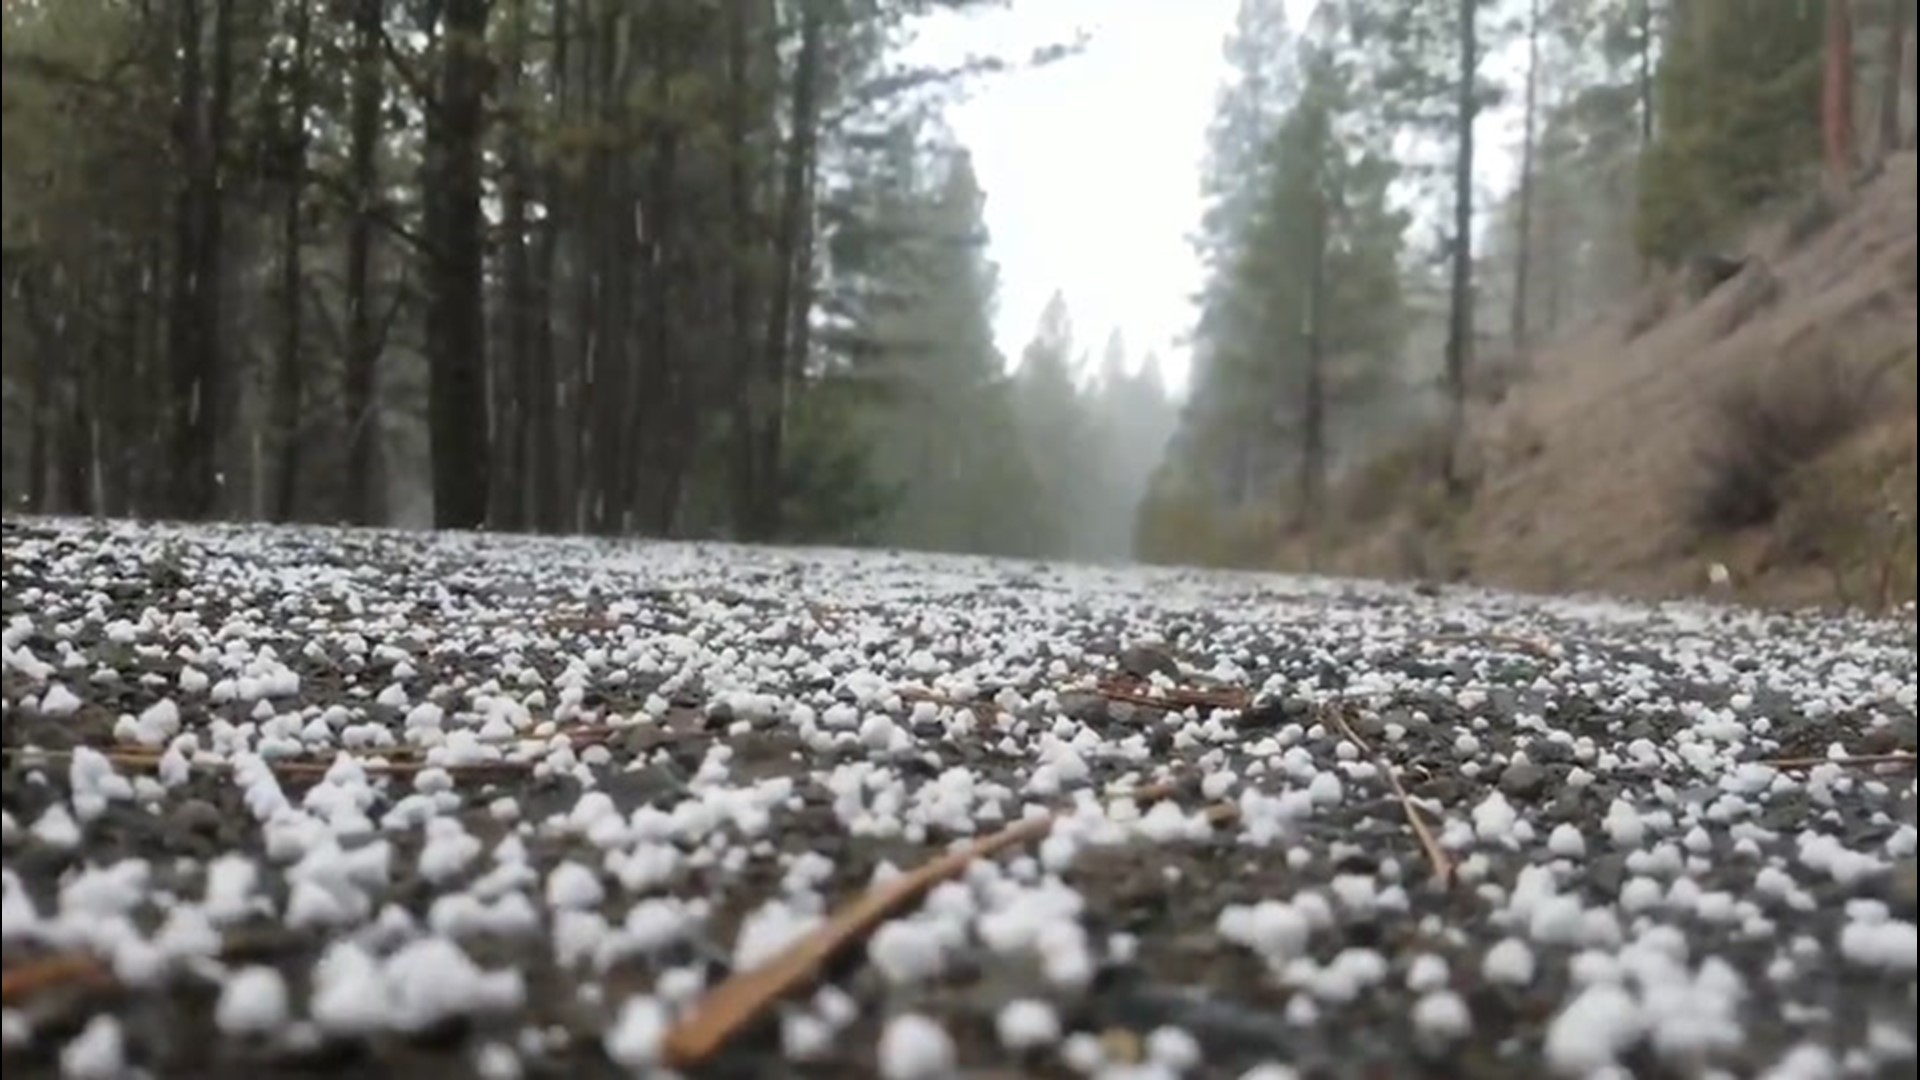 The Ochoco Mountains in Oregon were pelted by graupel on April 1. It hit the ground making popcornlike noises.